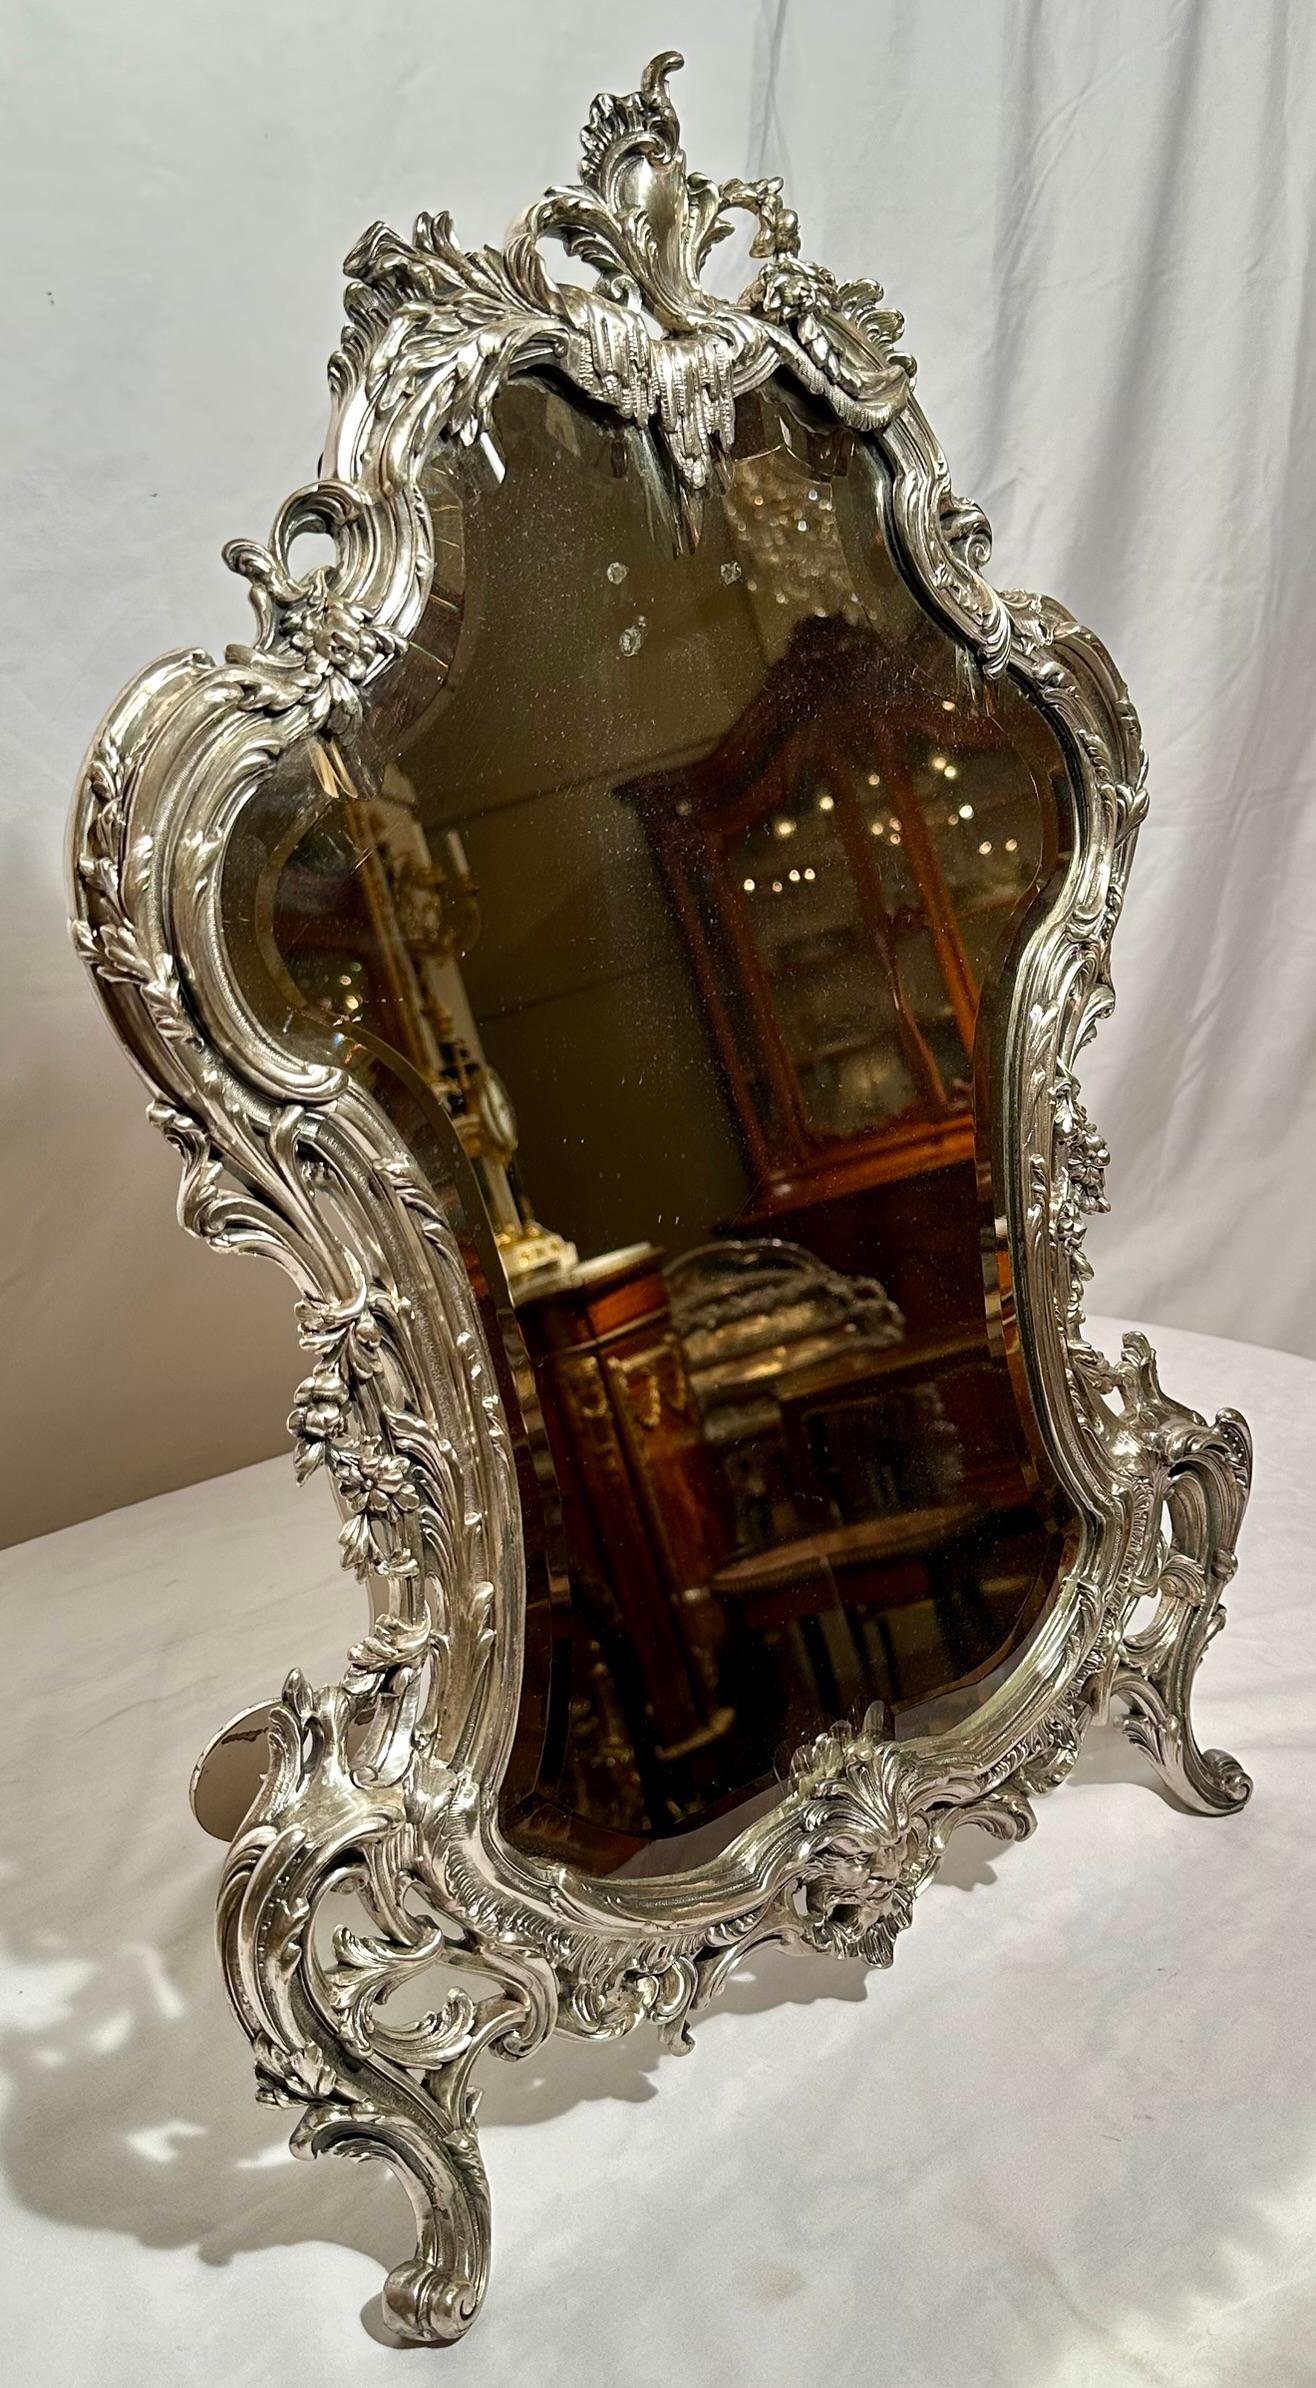 Exquisite Antique French Silvered Bronze Dresser Mirror with Beveling, Circa 1870-1880.